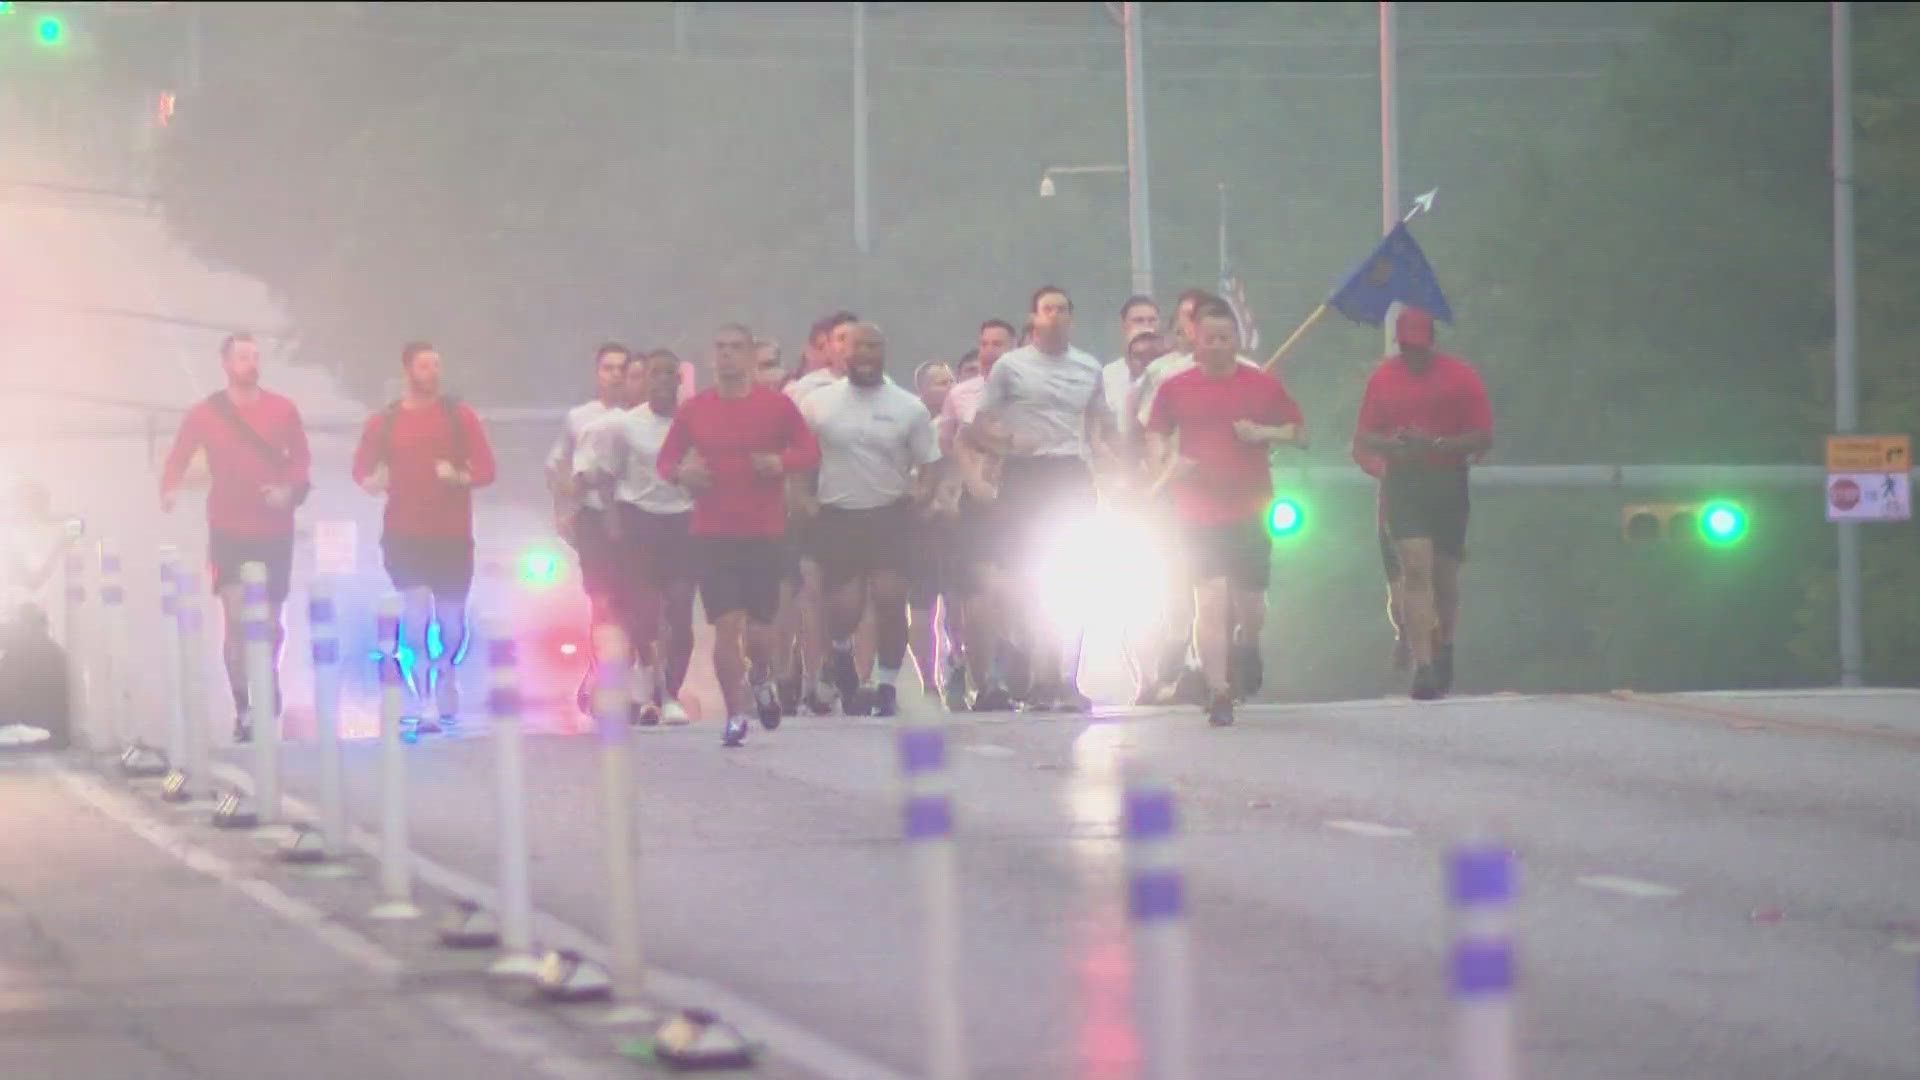 Dozens of Austin police cadets participated in the traditional "chief's run" on Wednesday morning. They are part of the 151st cadet class.